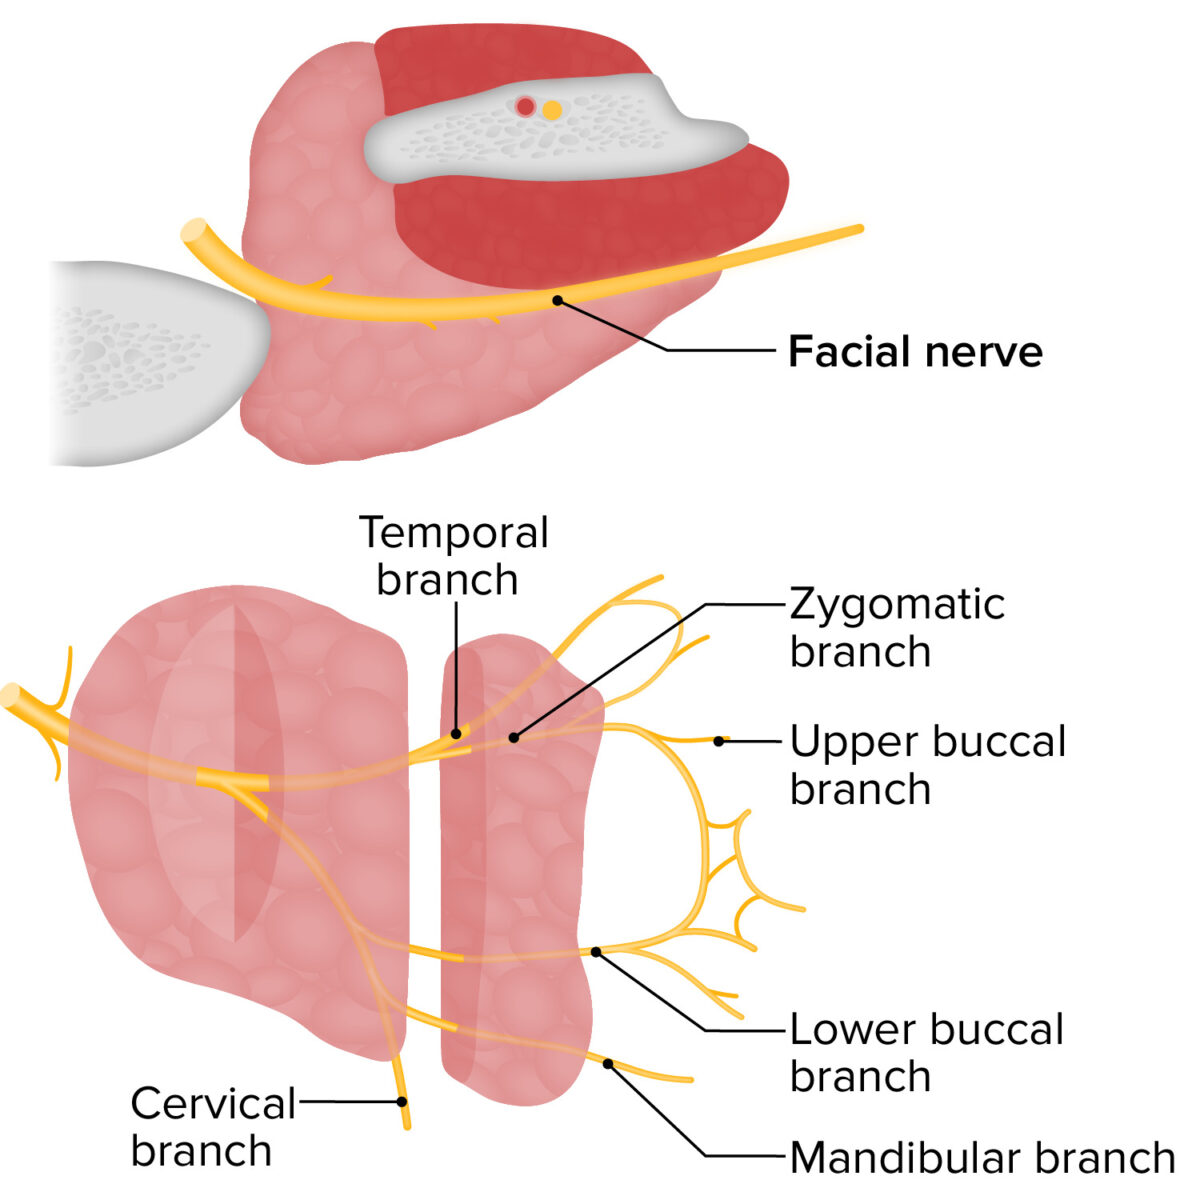 The structures within the parotid gland